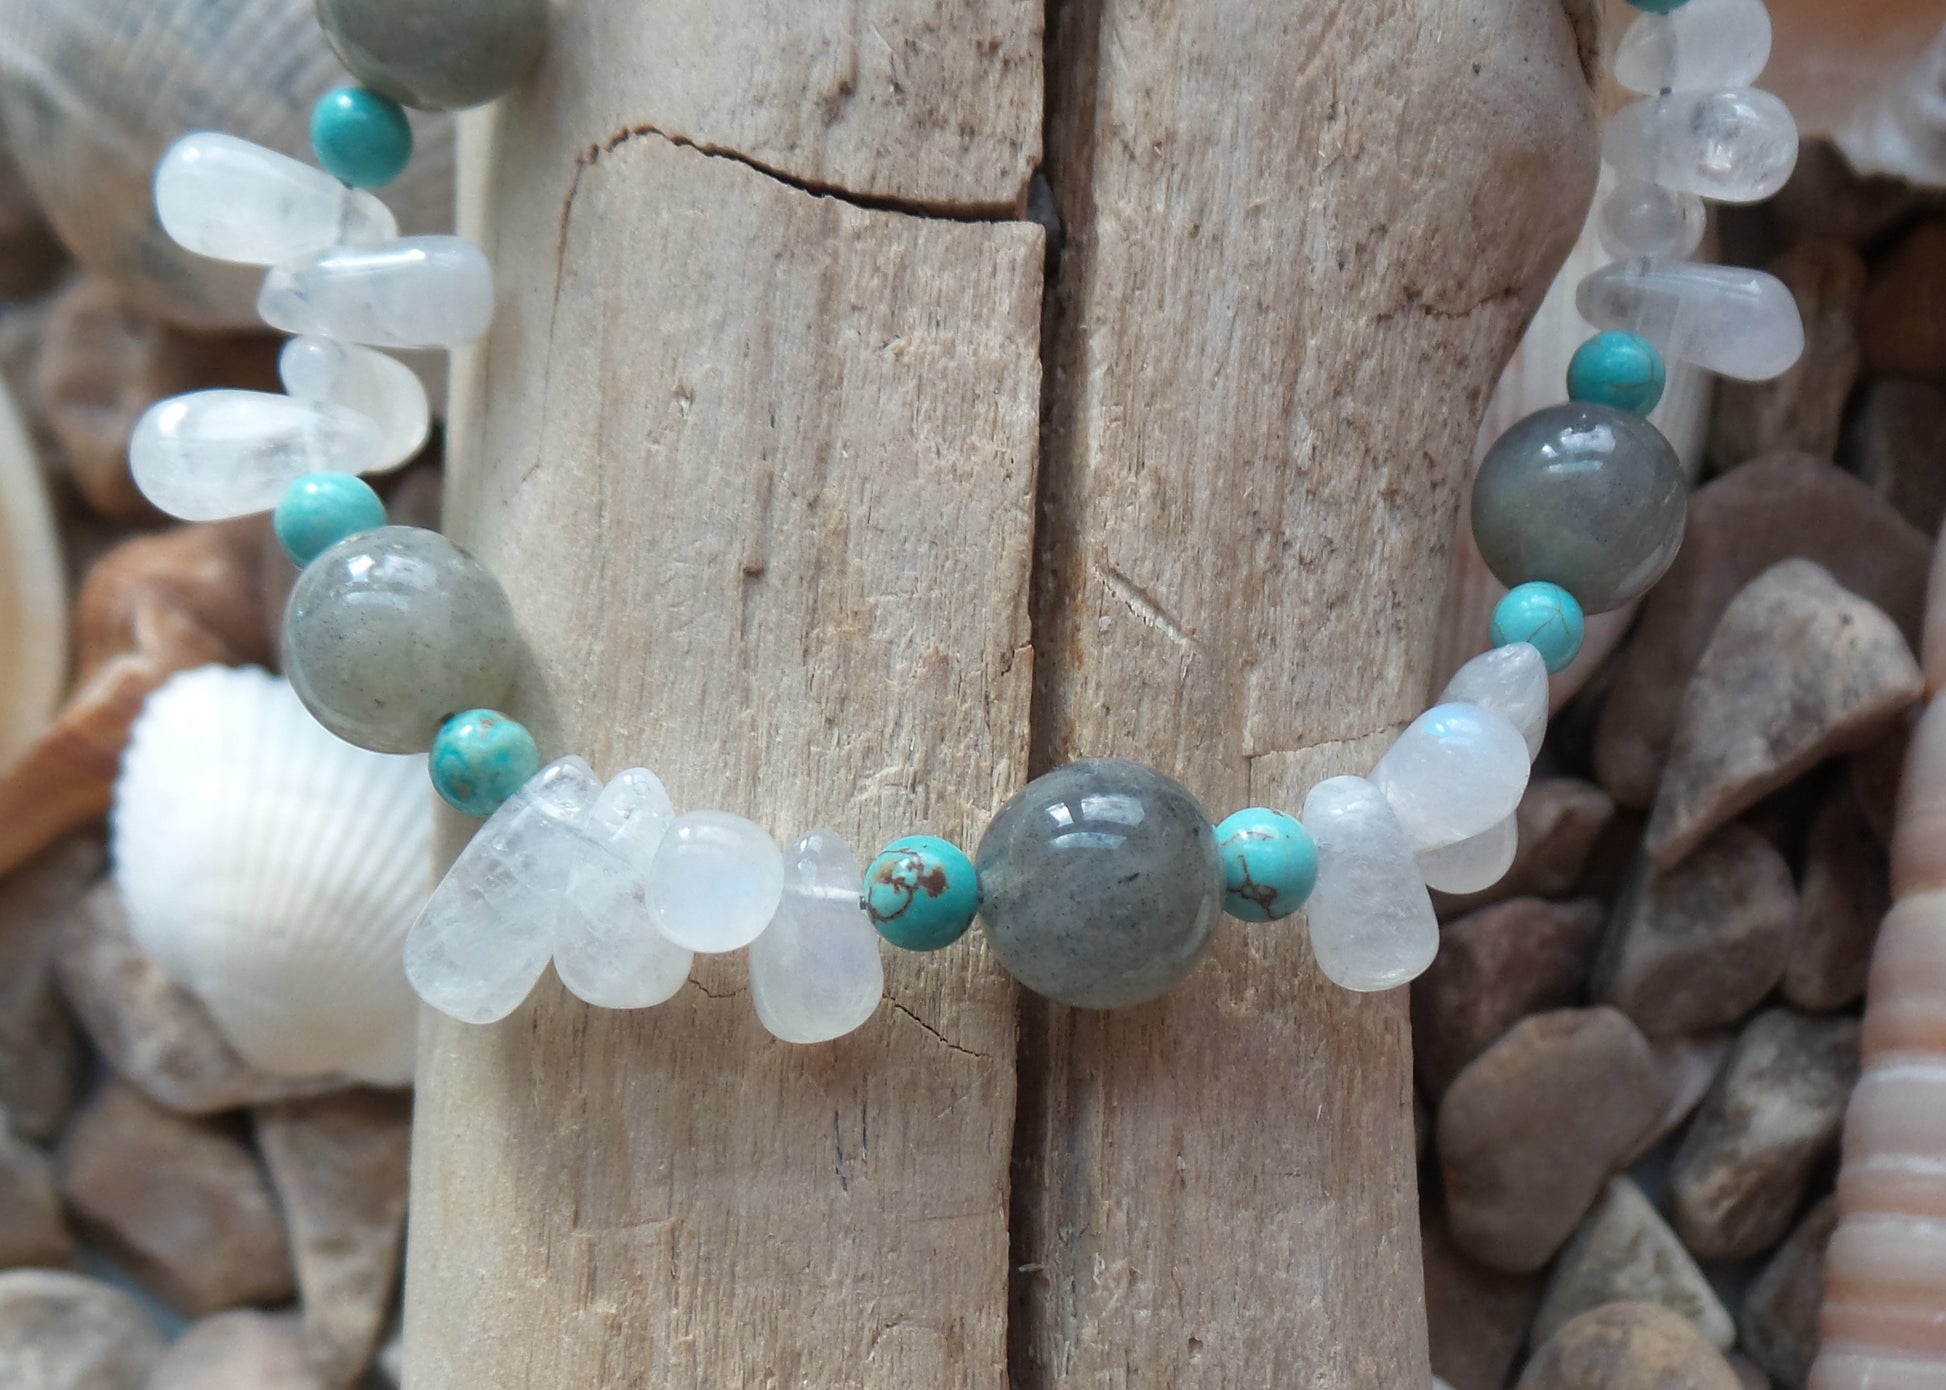 Moonstone Labradorite Turquoise Beaded Gemstone Bracelet with Sterling Silver lobster claw clasp, on Beach Wood background 